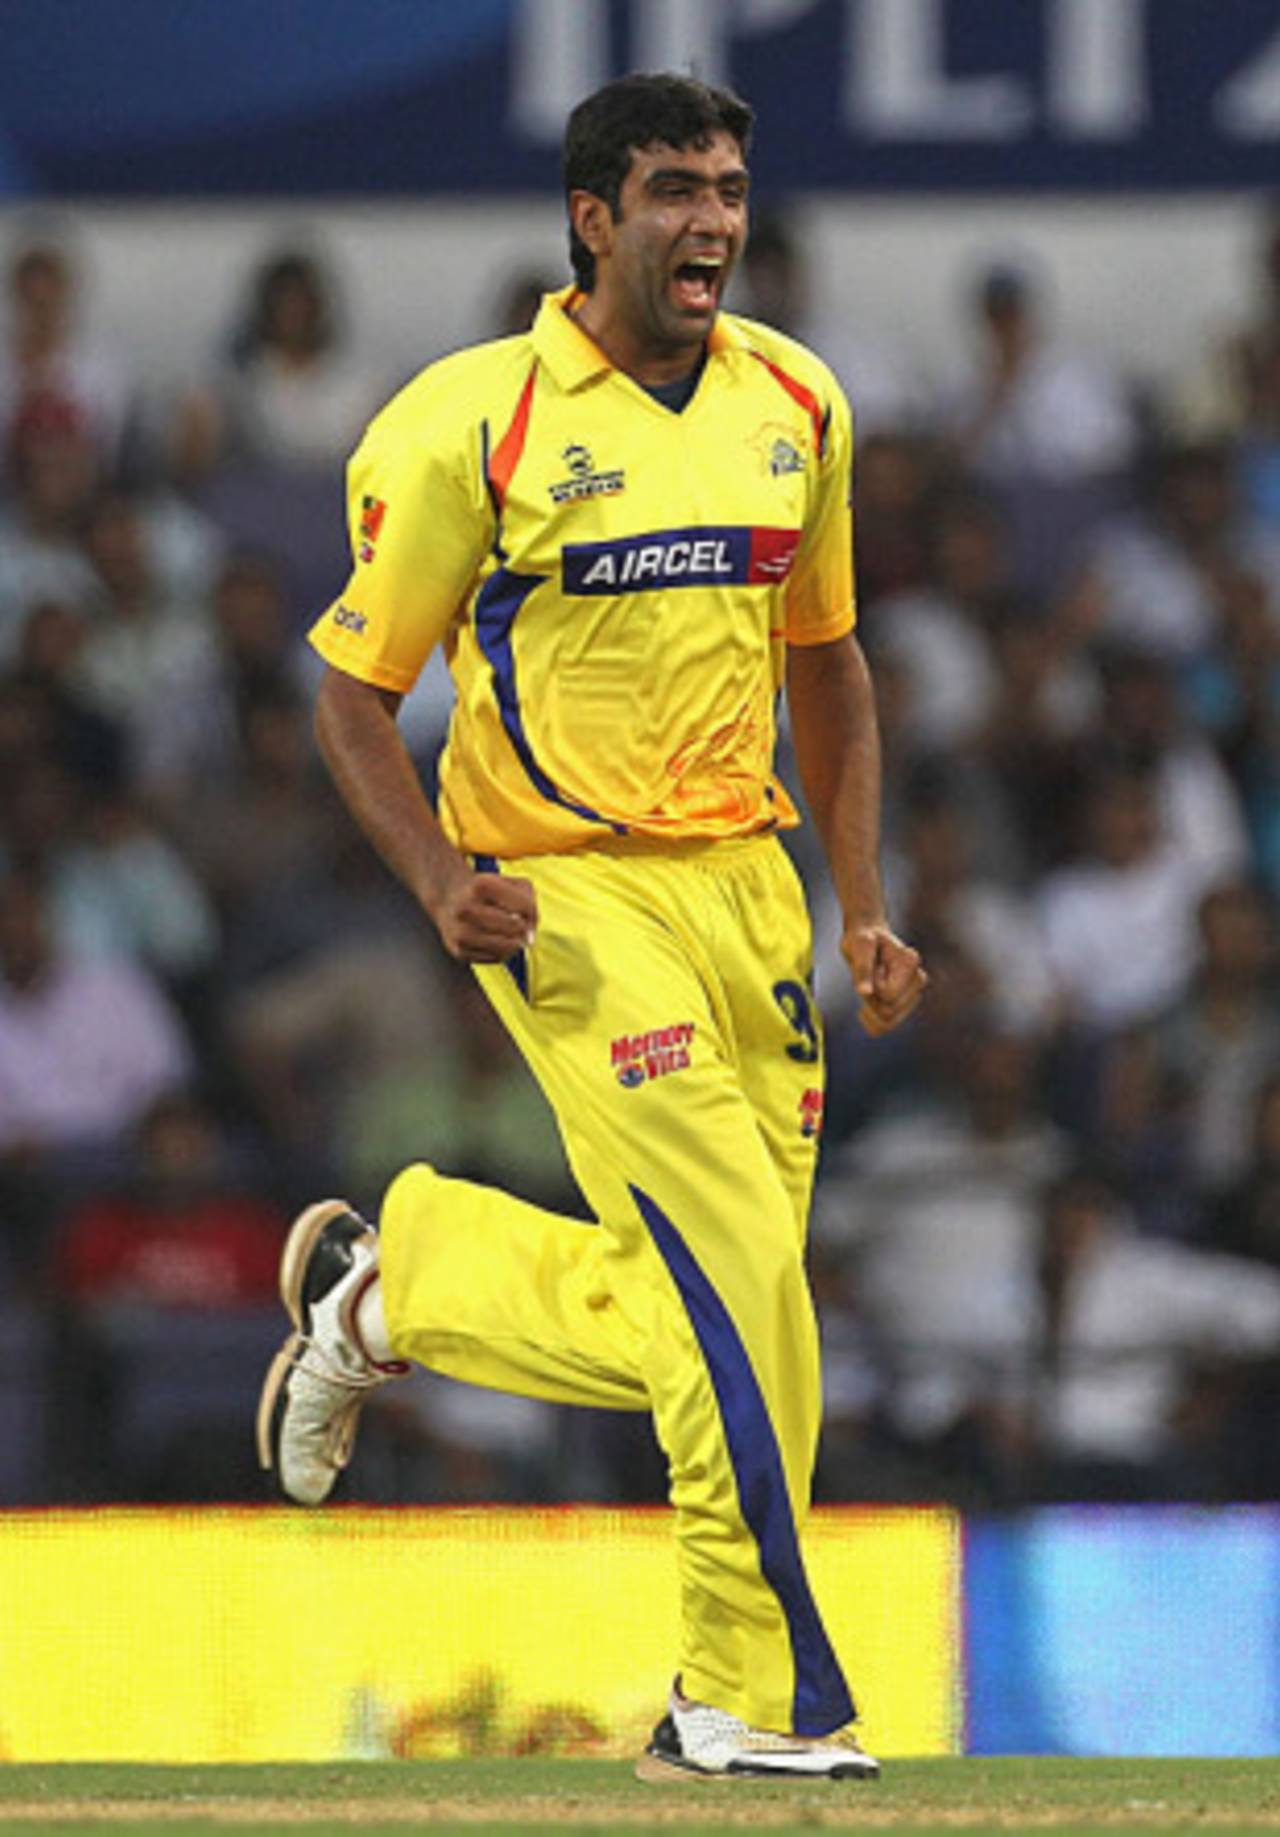 With his fine run of form, R Ashwin gives Chennai the luxury of leaving Muralitharan out to bolster other departments&nbsp;&nbsp;&bull;&nbsp;&nbsp;Indian Premier League